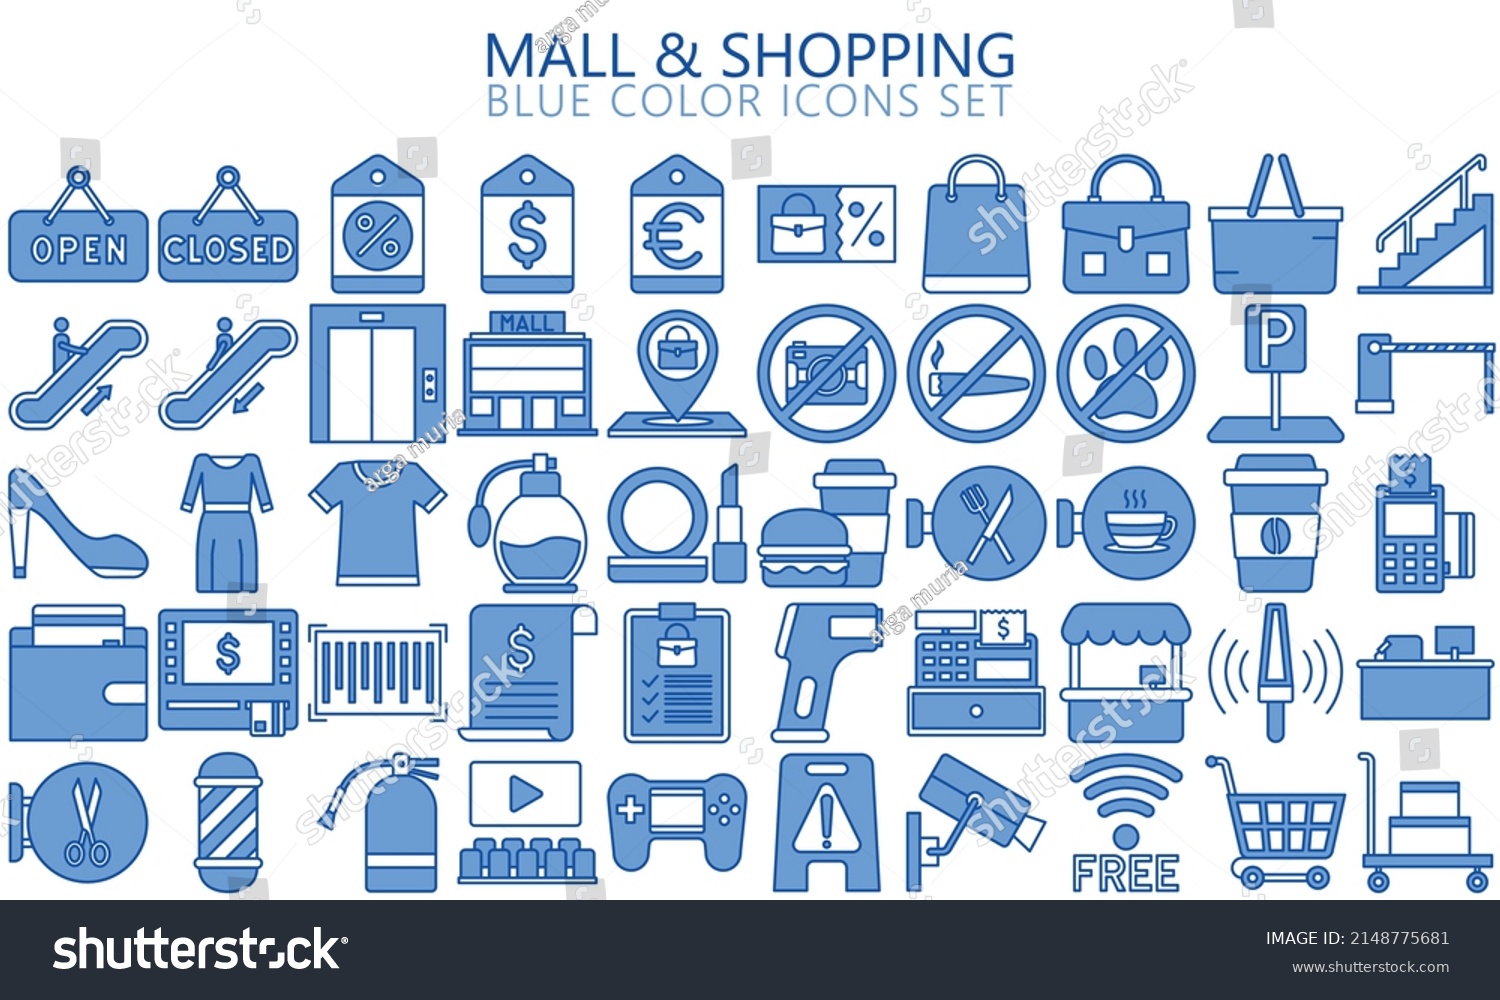 SVG of Market and Shopping mall, retail, blue color icons set with sale offer and payment symbols. Outline icons collection. Used for web, UI, UX kit and applications, vector EPS 10 ready convert to SVG svg